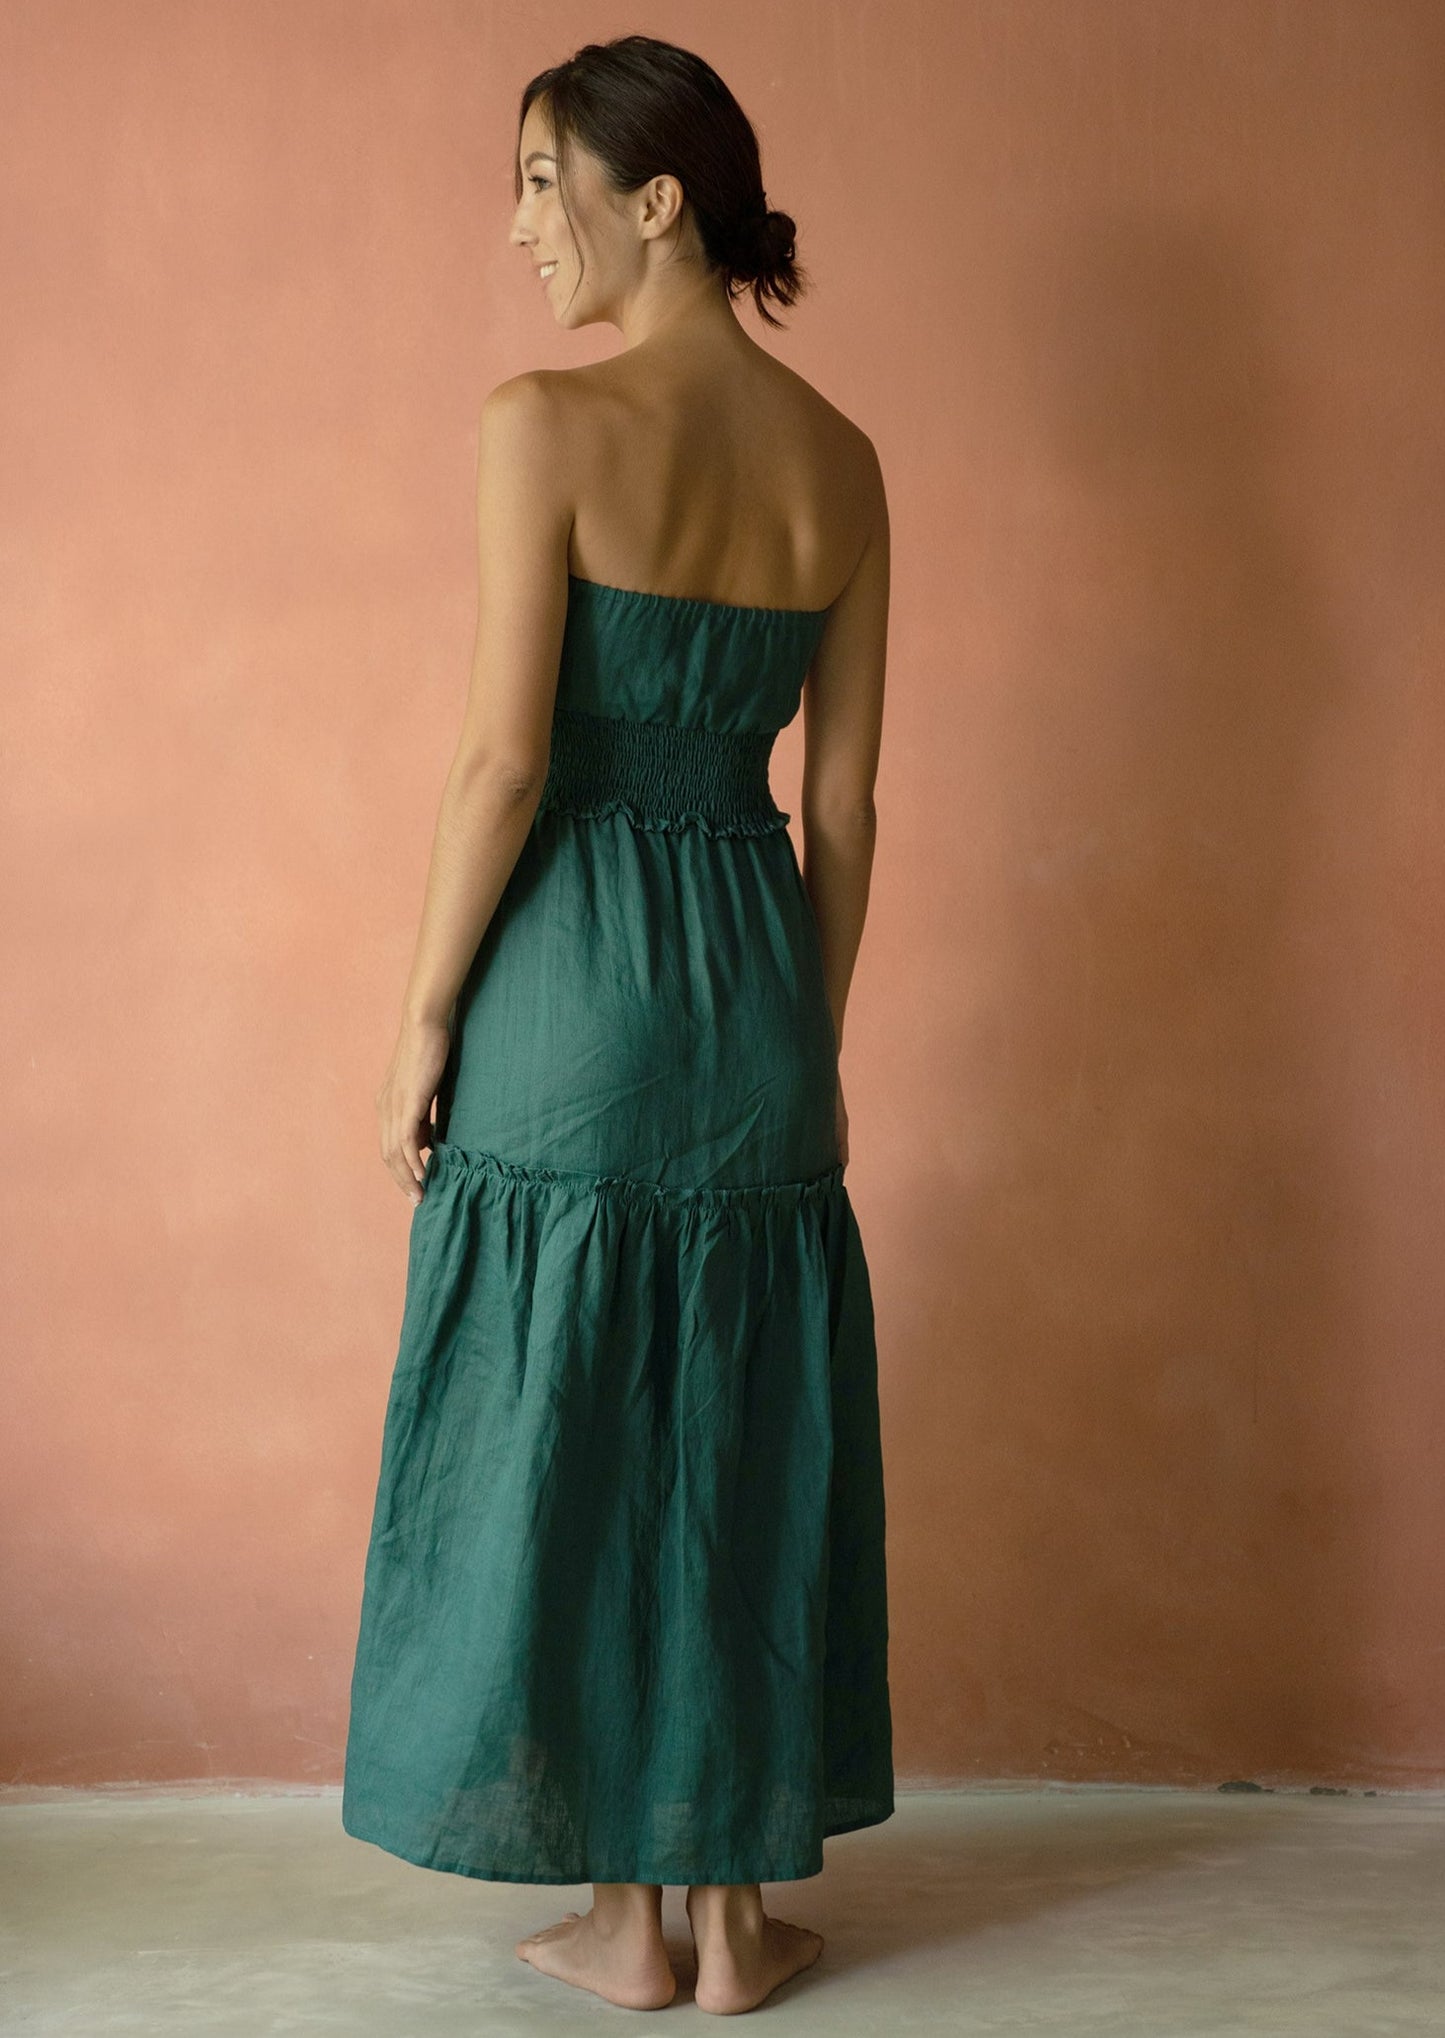 Sleeveless long dress green for staycation | Sustainable resort wear